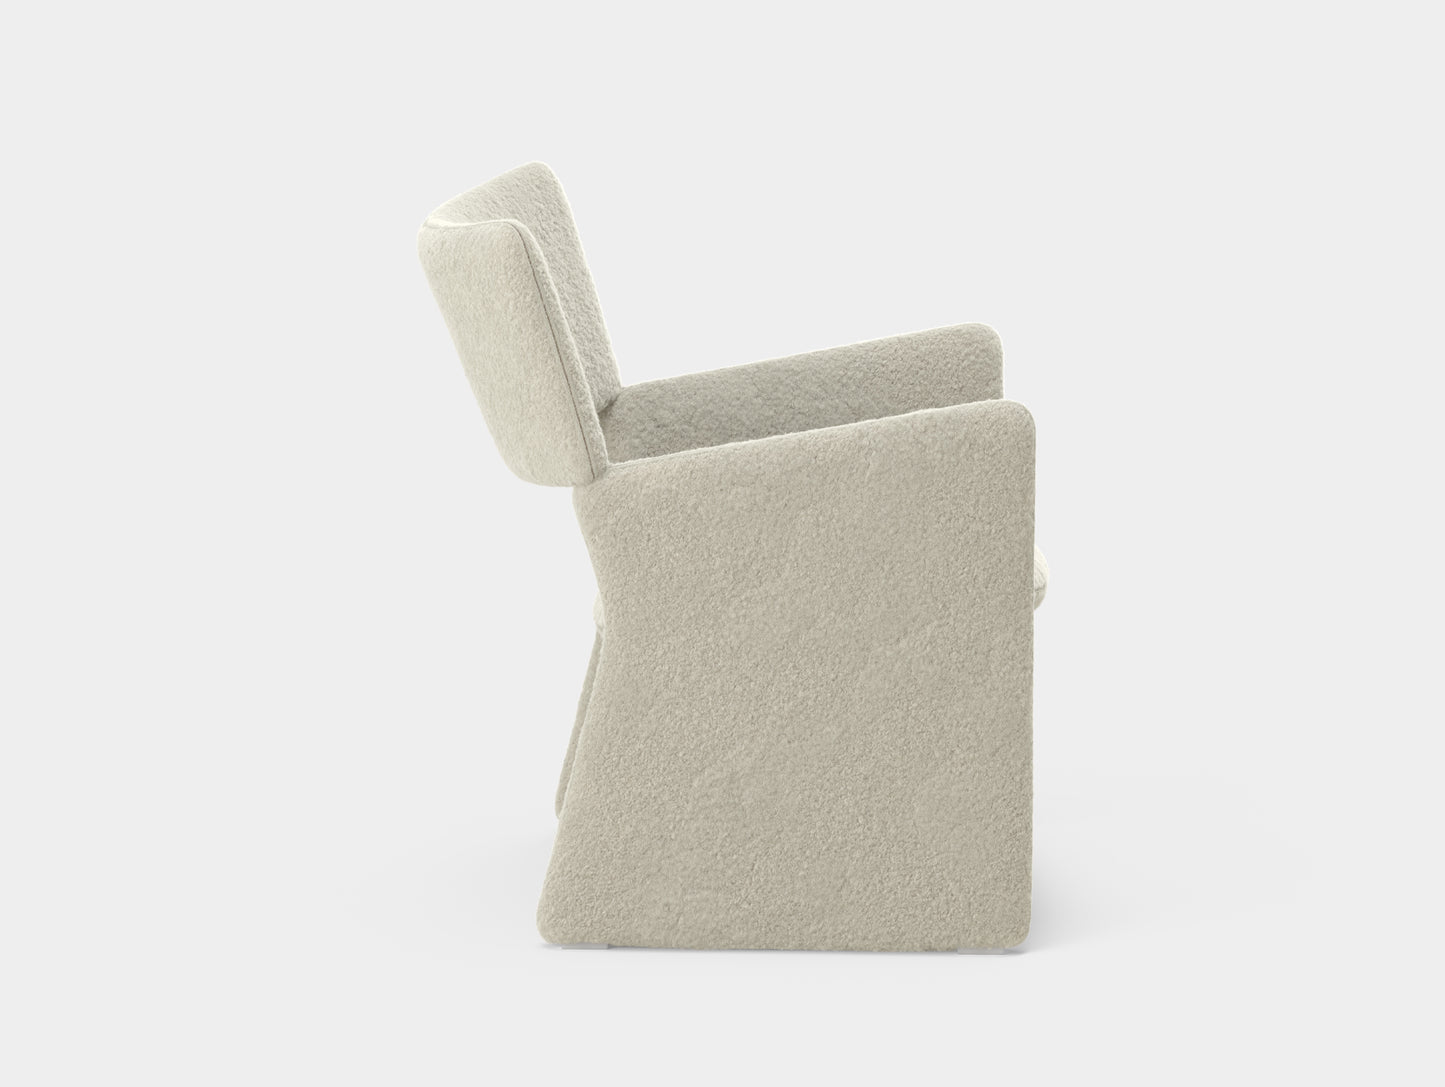 Crown Easy Chair by Massproductions - Kvadrat Silas 114